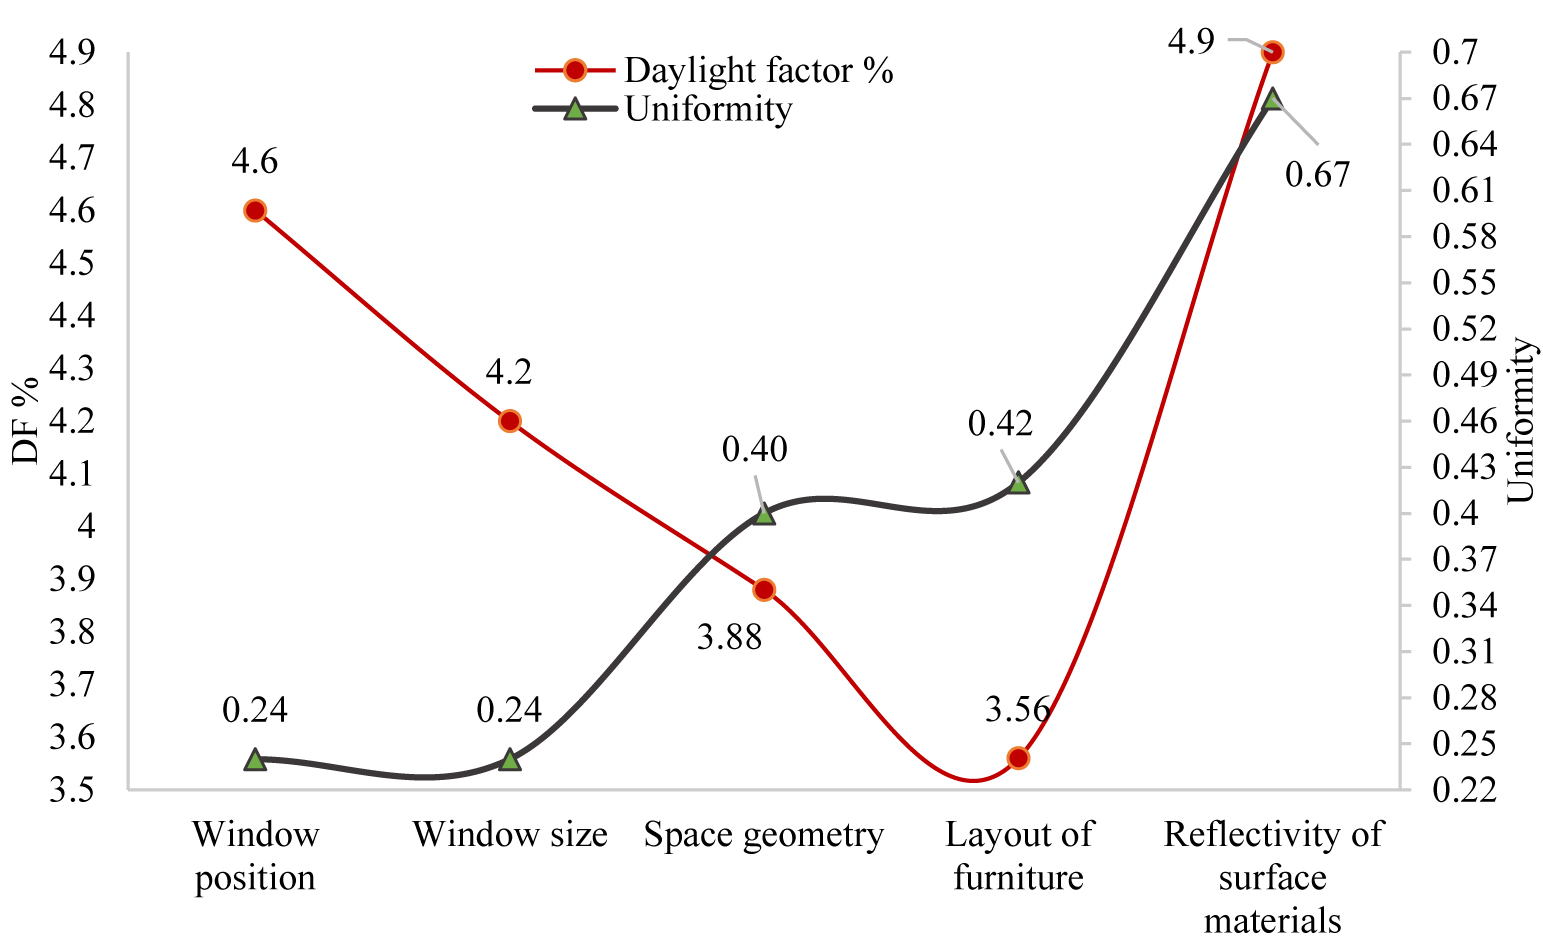 The impact of different variables on daylight factor and uniformity rate.